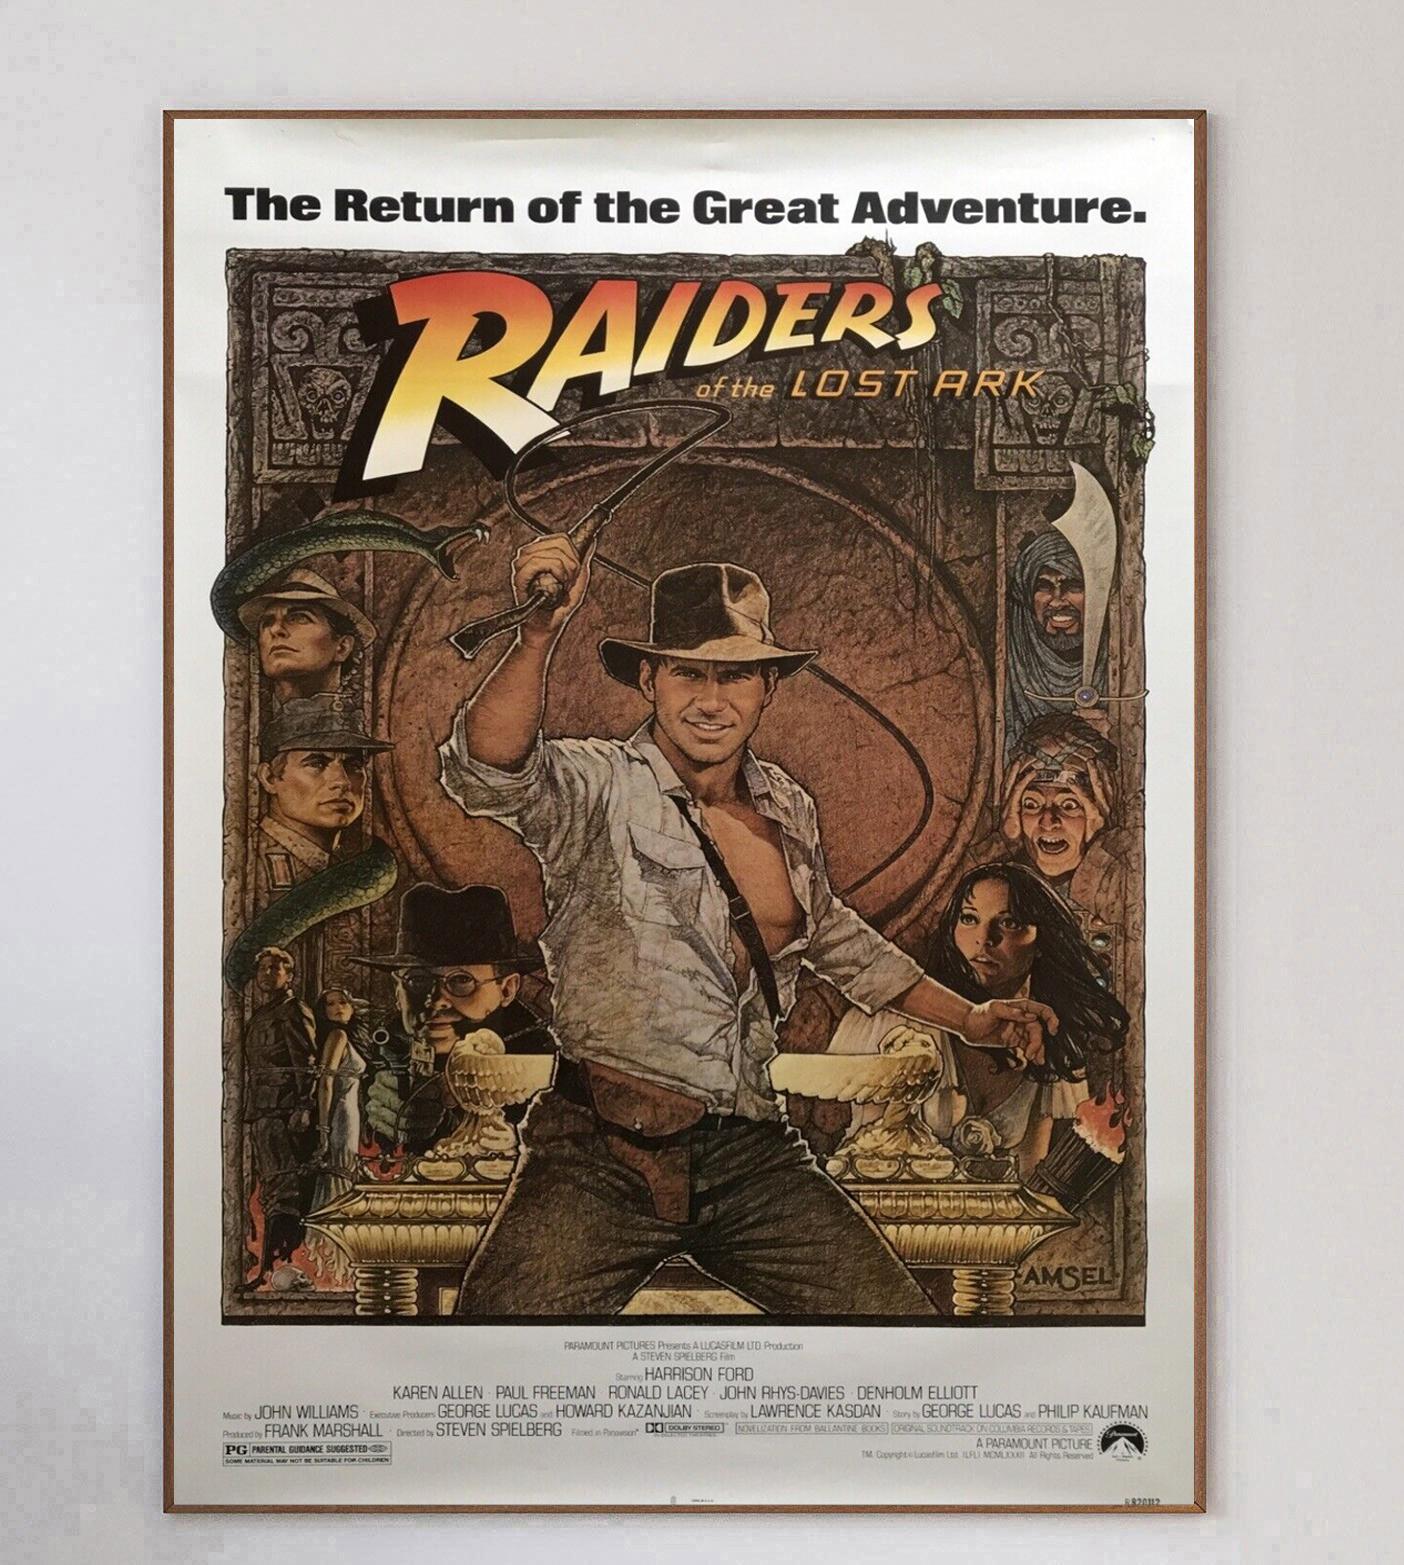 A huge commercial and critical success, Raiders of the Lost Ark smashed into movie theatres in 1981 and quickly became the highest grossing film of the year as well as going on to sweep 5 Academy Awards. Spawning four sequels, this first